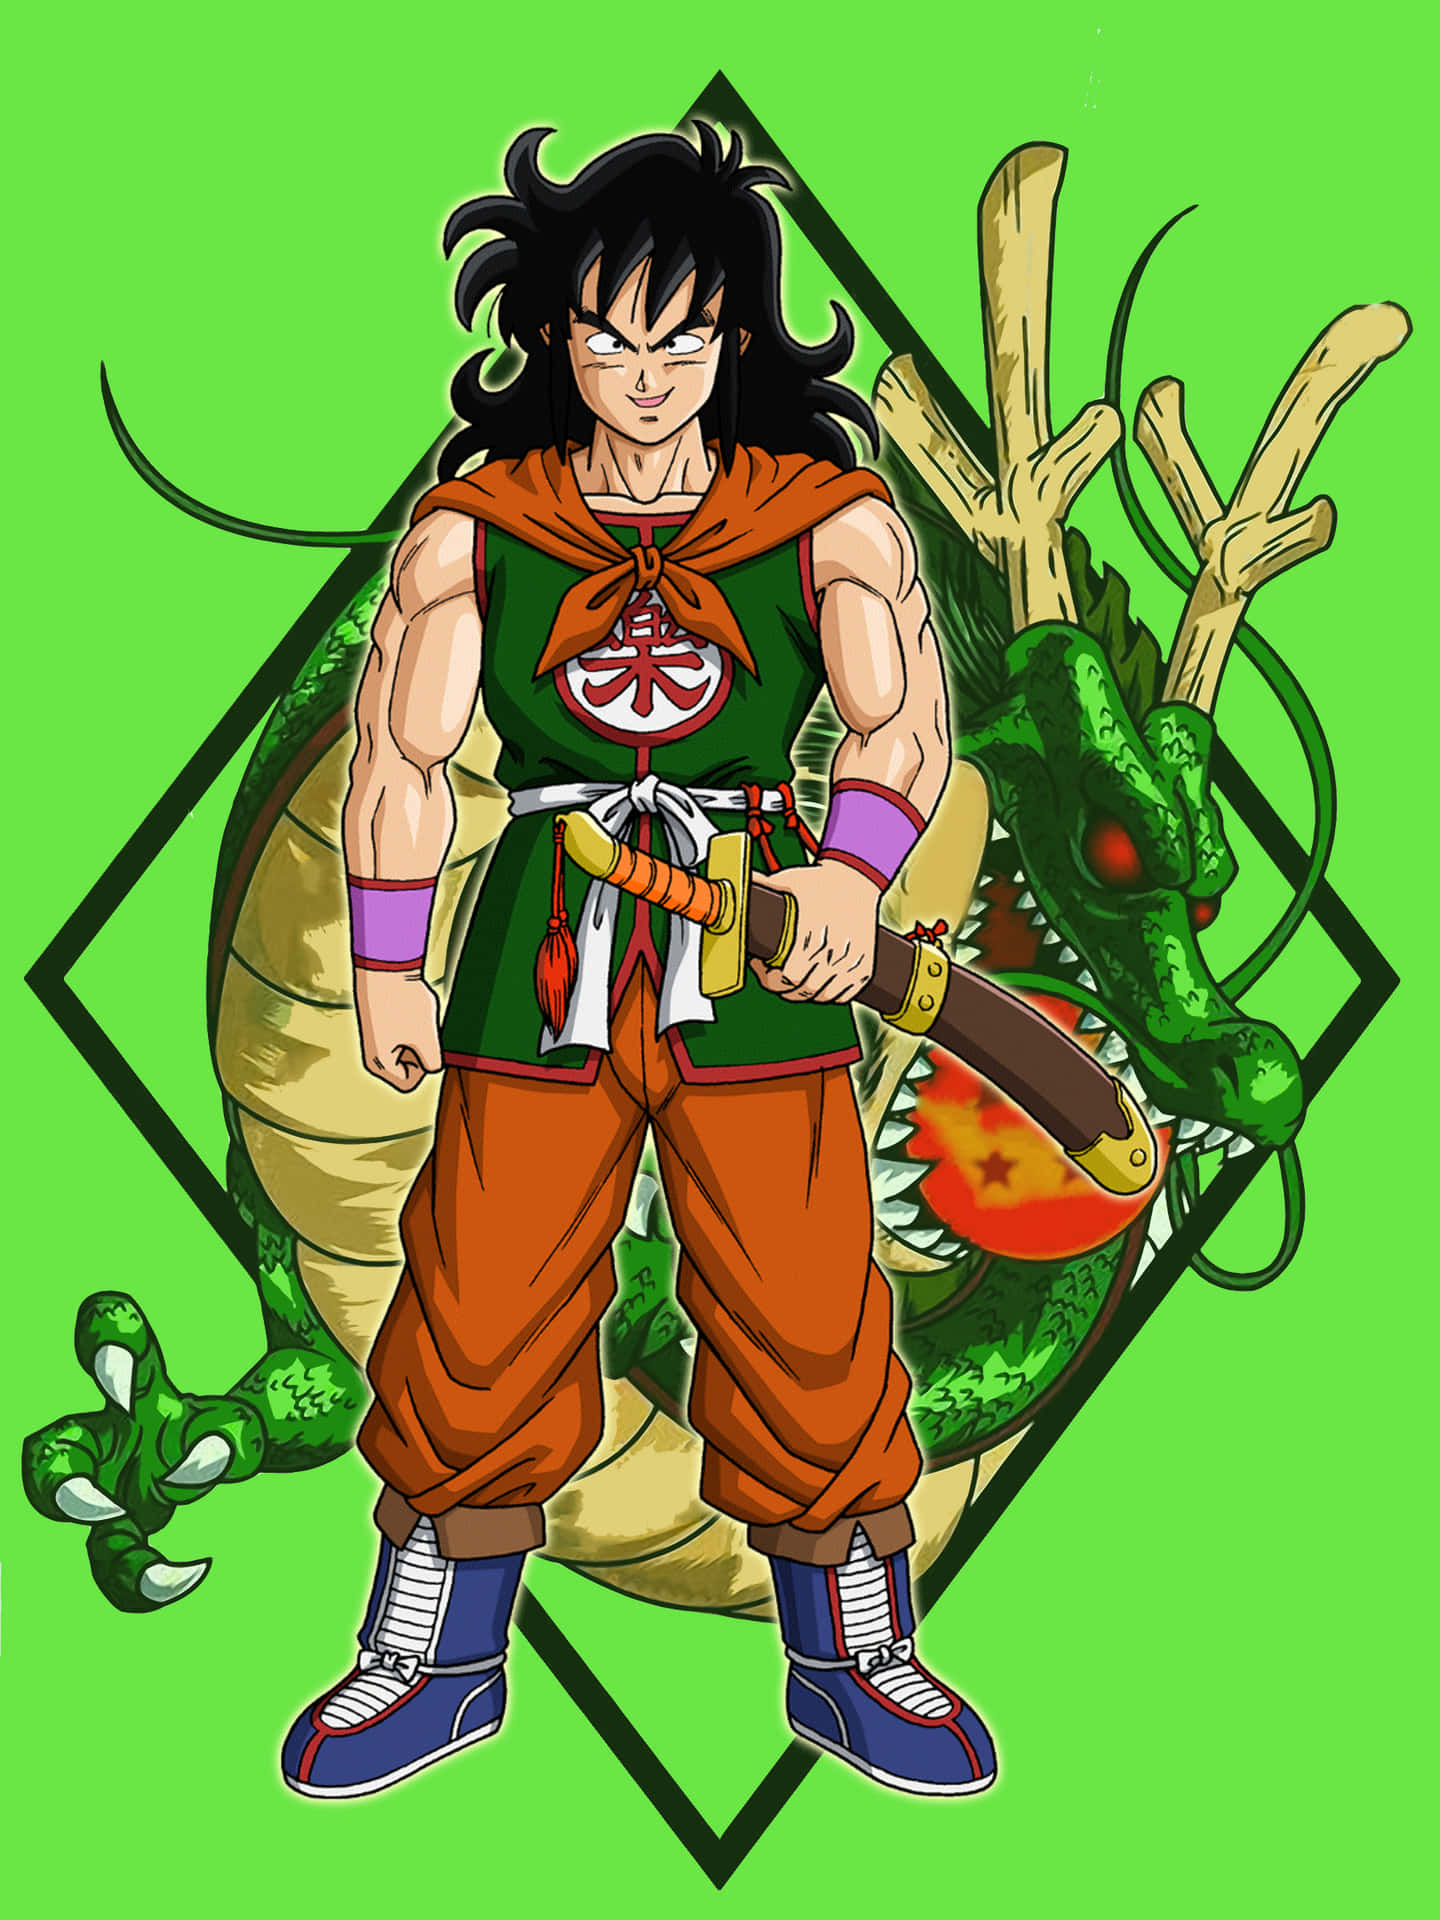 Yamcha, the courageous and tenacious fighter of the Dragon Ball universe. Wallpaper